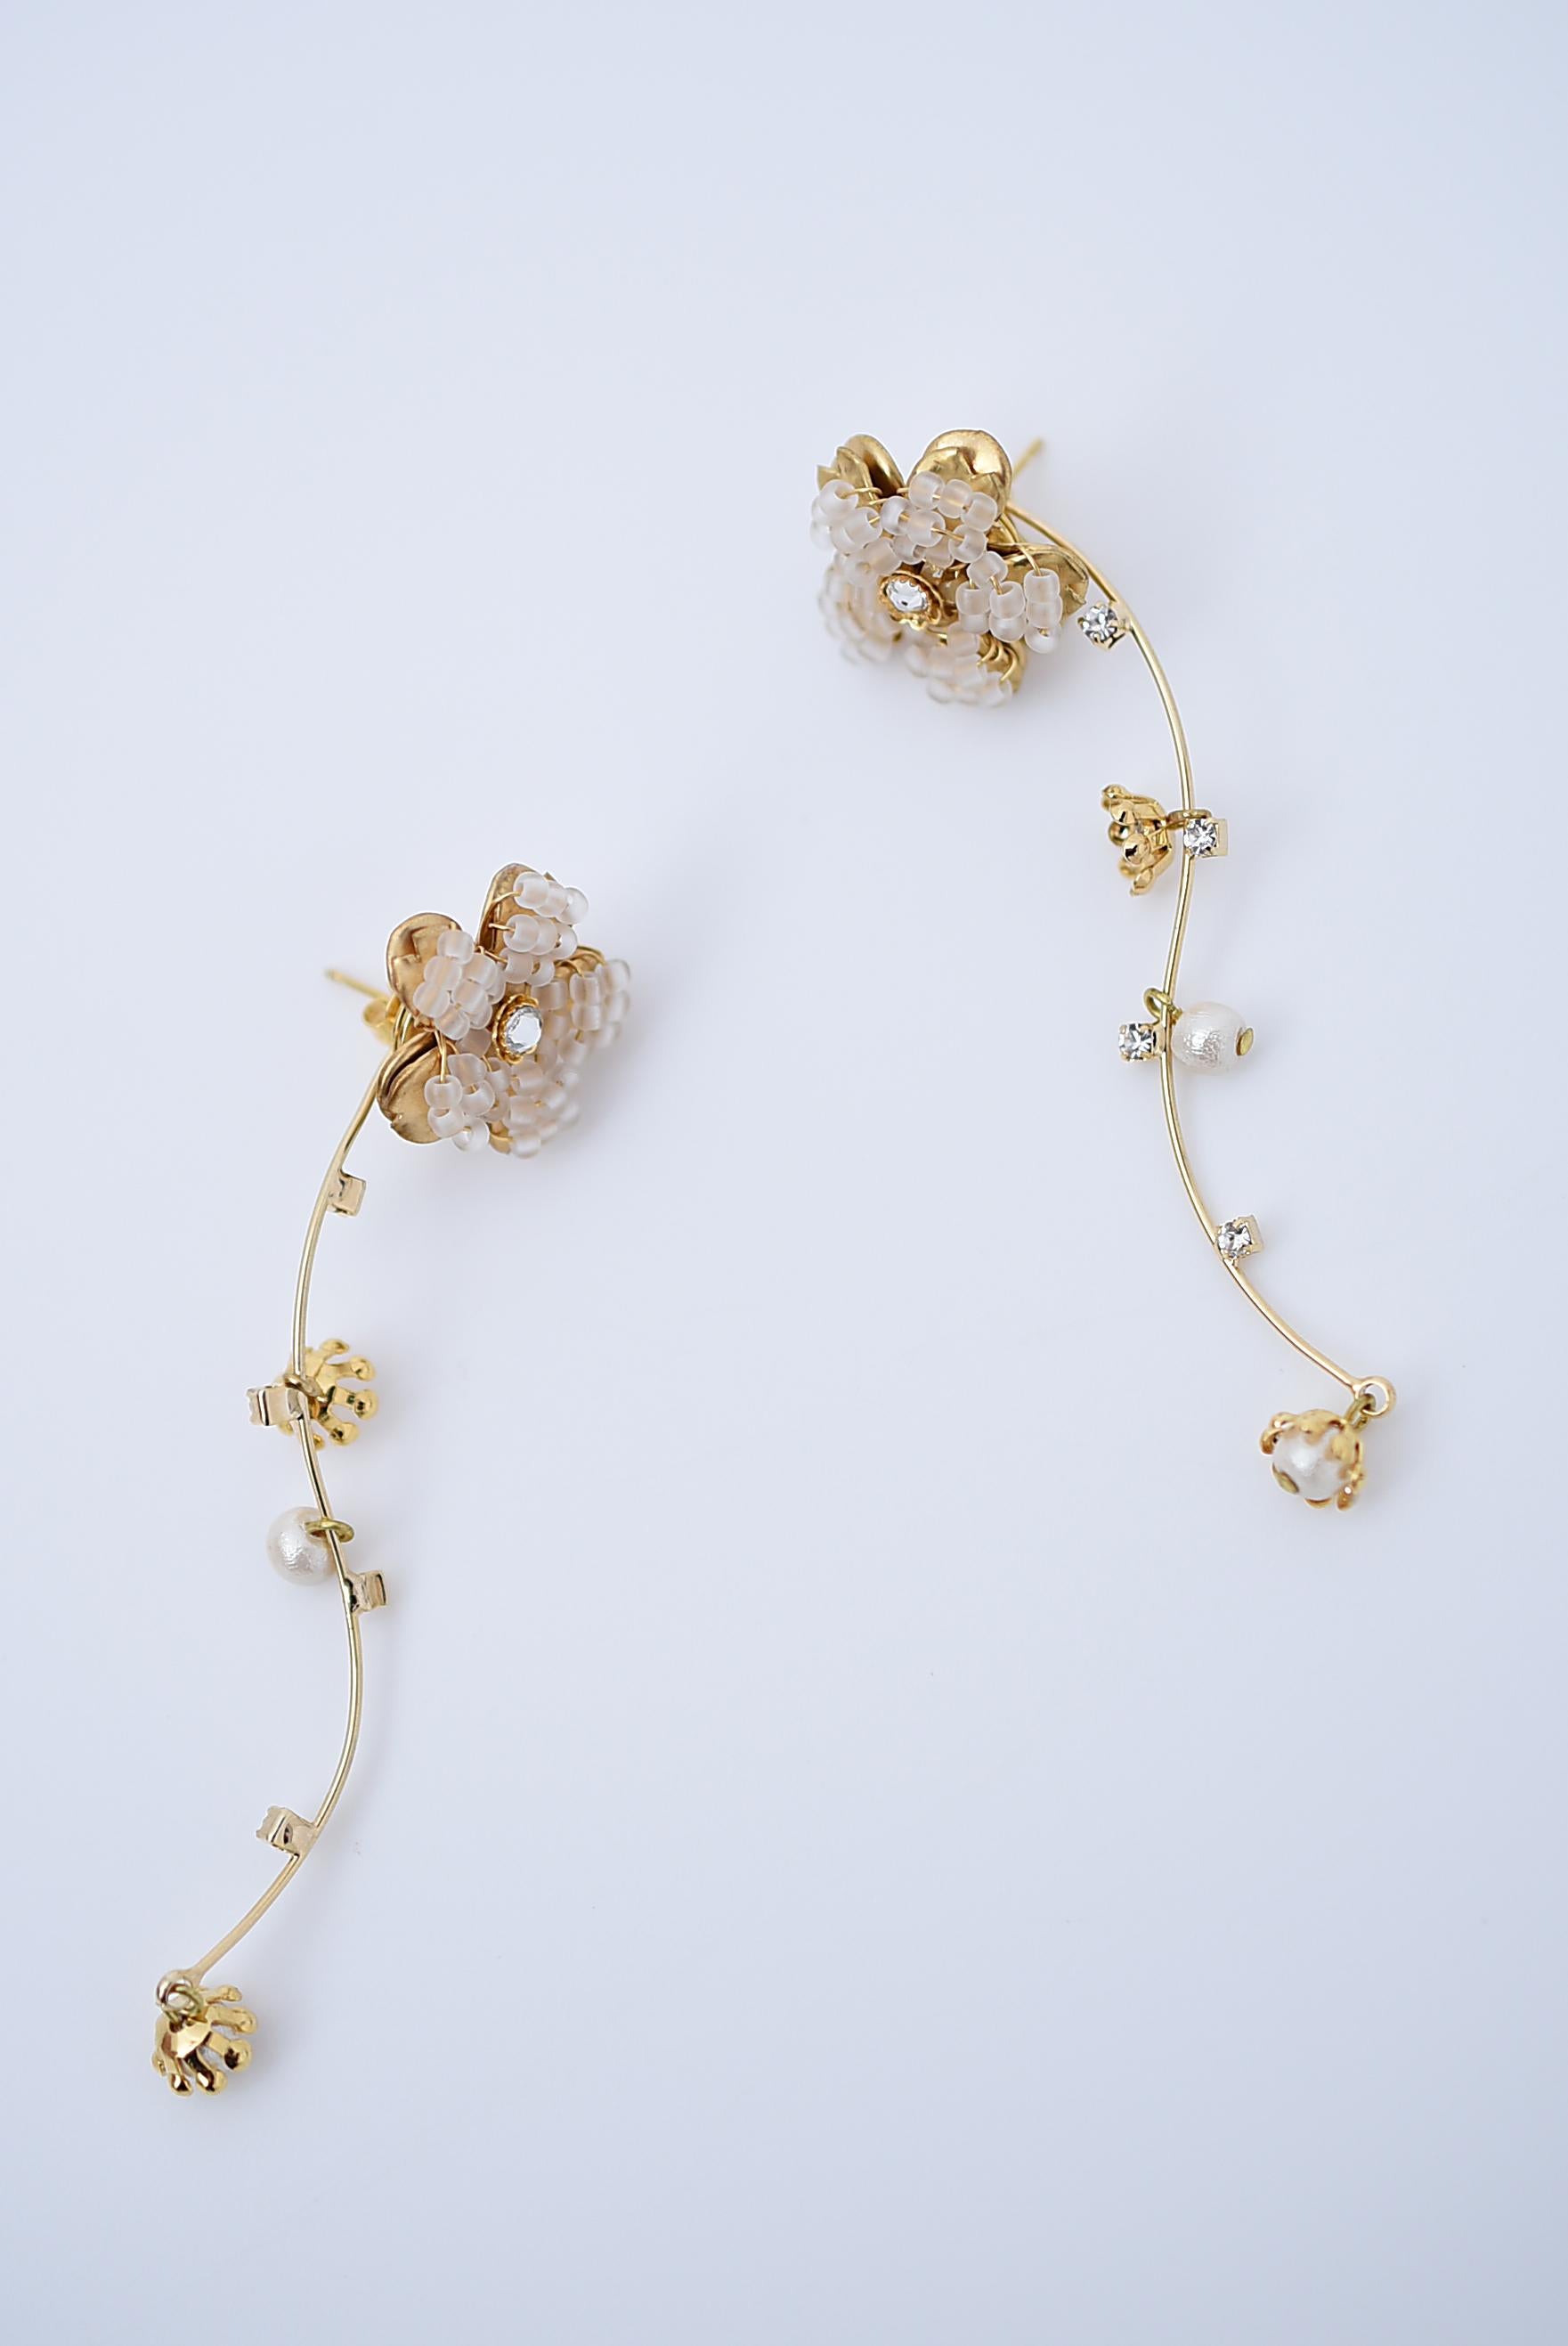 material:glass beads,glass beadsbrass,wood pearl,swarovski
size:length 6.2cm

You can use 2way style.
The line part shakes beautifully!
The small flowers and pearls attached to the line part also sway together.
When worn with just the cherry blossom